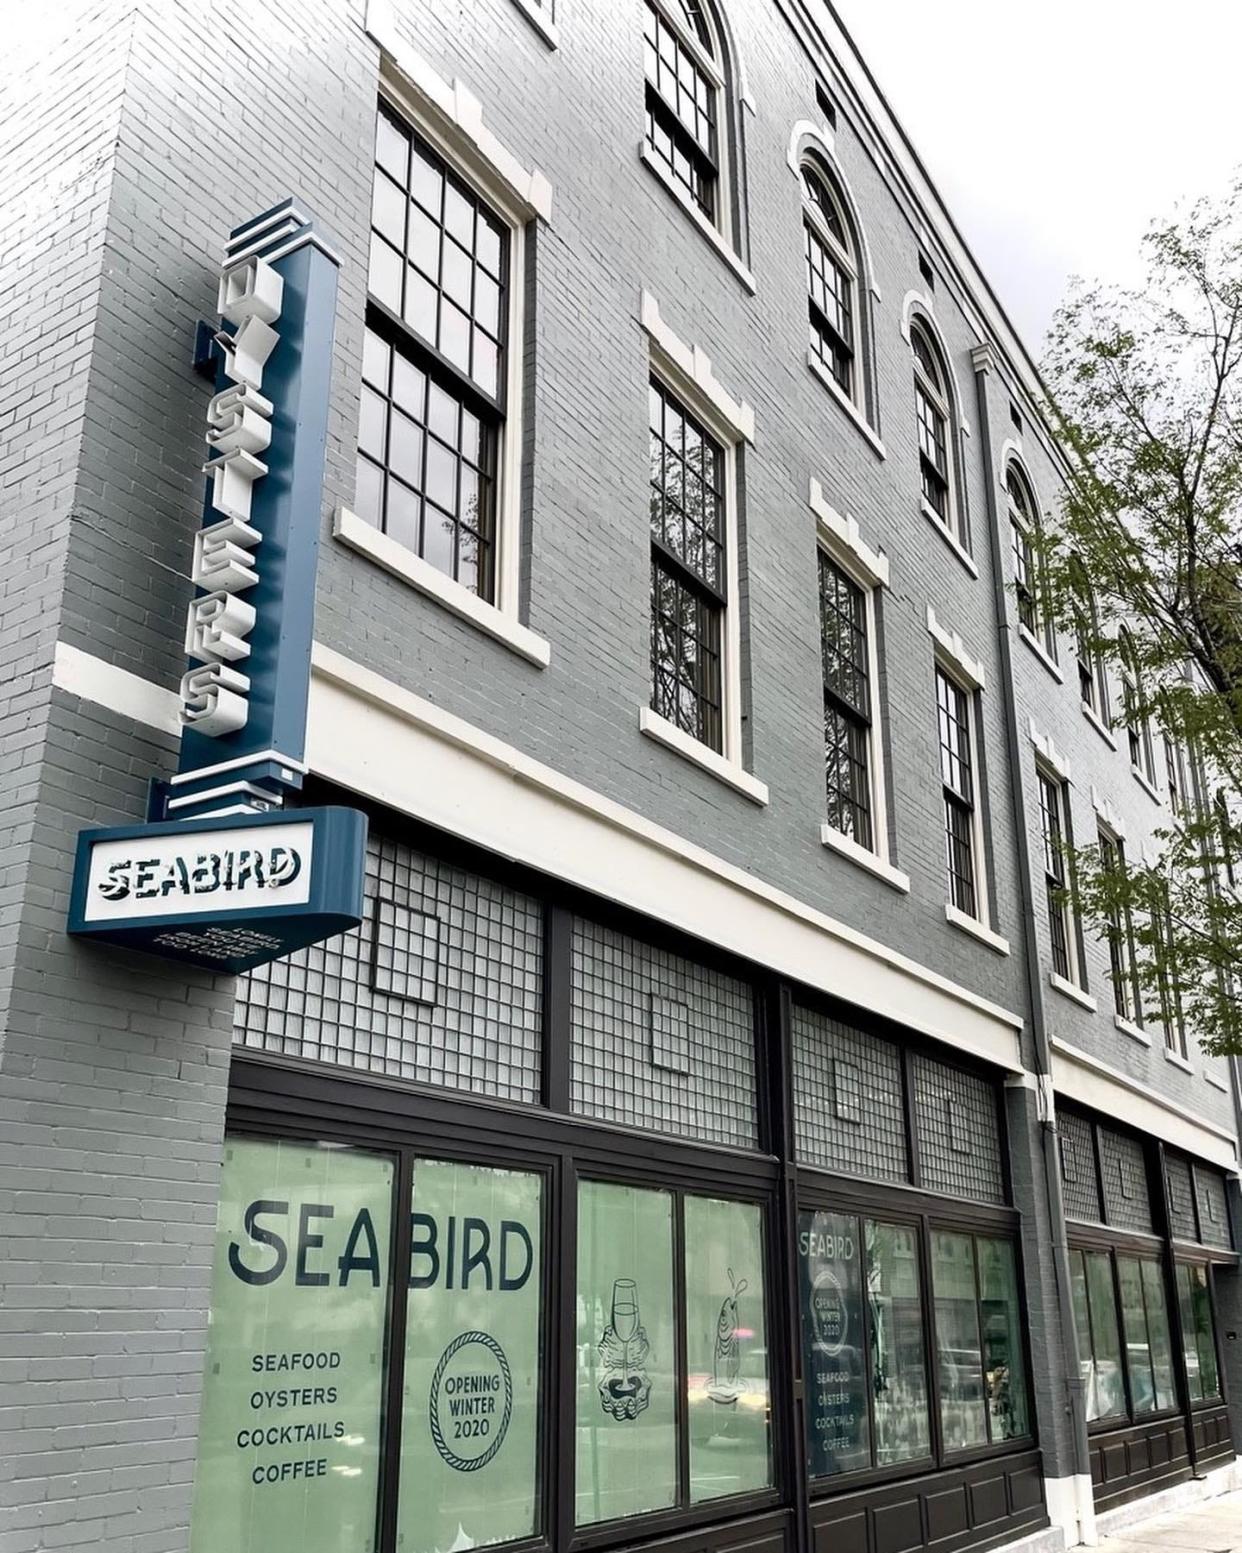 Exterior of the beautifully renovated historic building located at 1 S. Front St., now Seabird restaurant. In the renovation process, original window frames with rope and pulleys and woodwork dating back to 1899 were discovered and restored based on historic photographs and documentation.